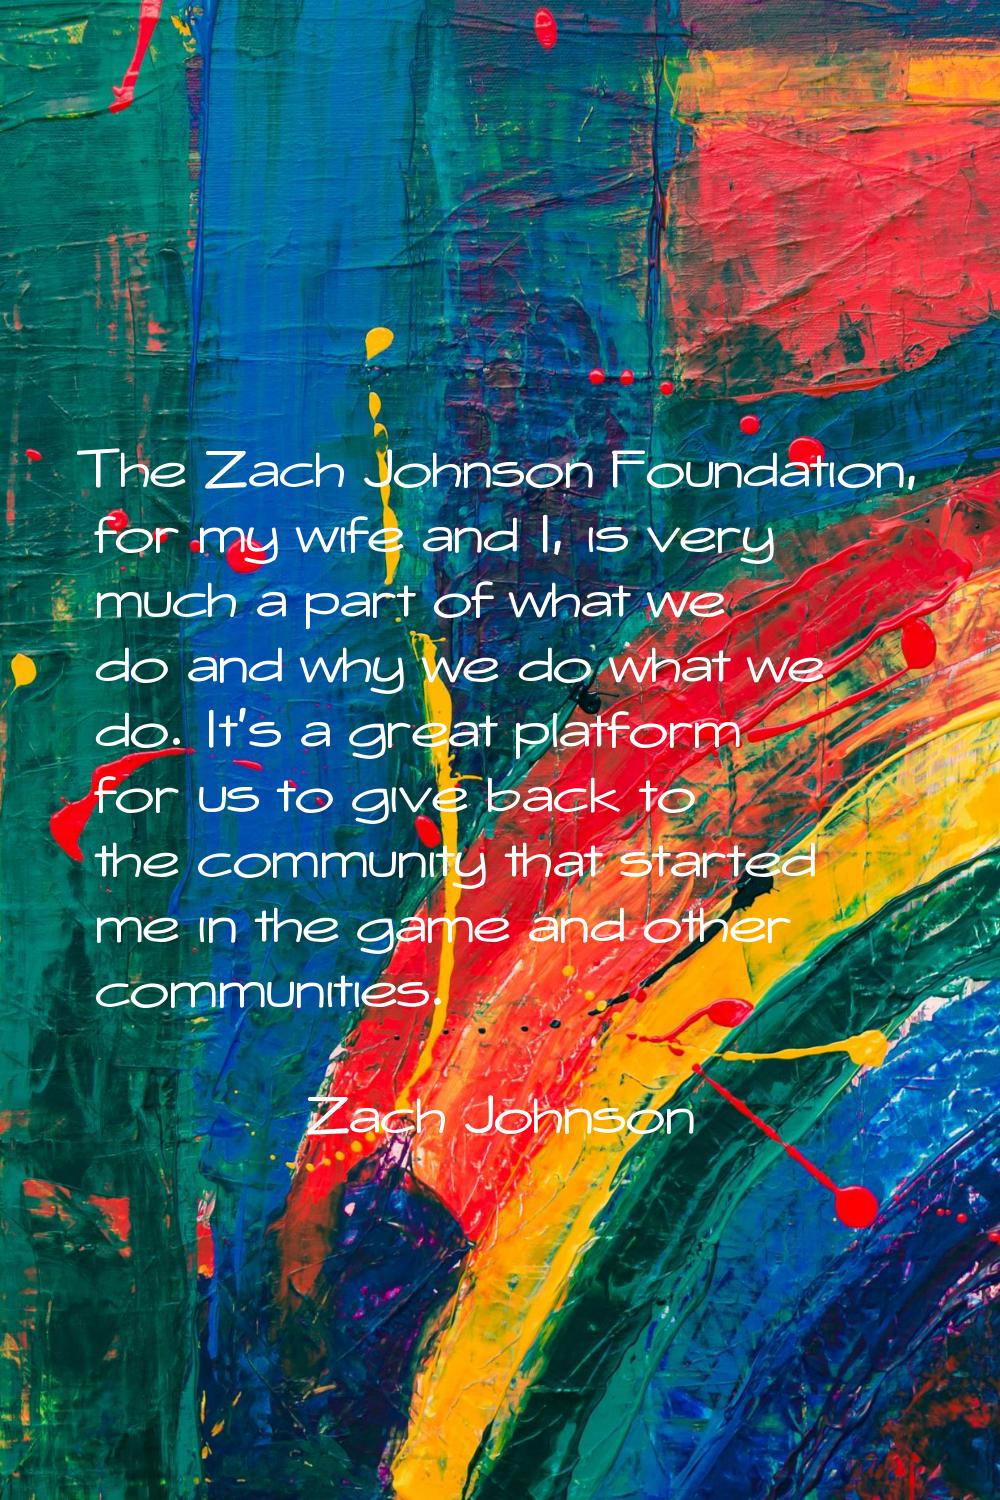 The Zach Johnson Foundation, for my wife and I, is very much a part of what we do and why we do wha